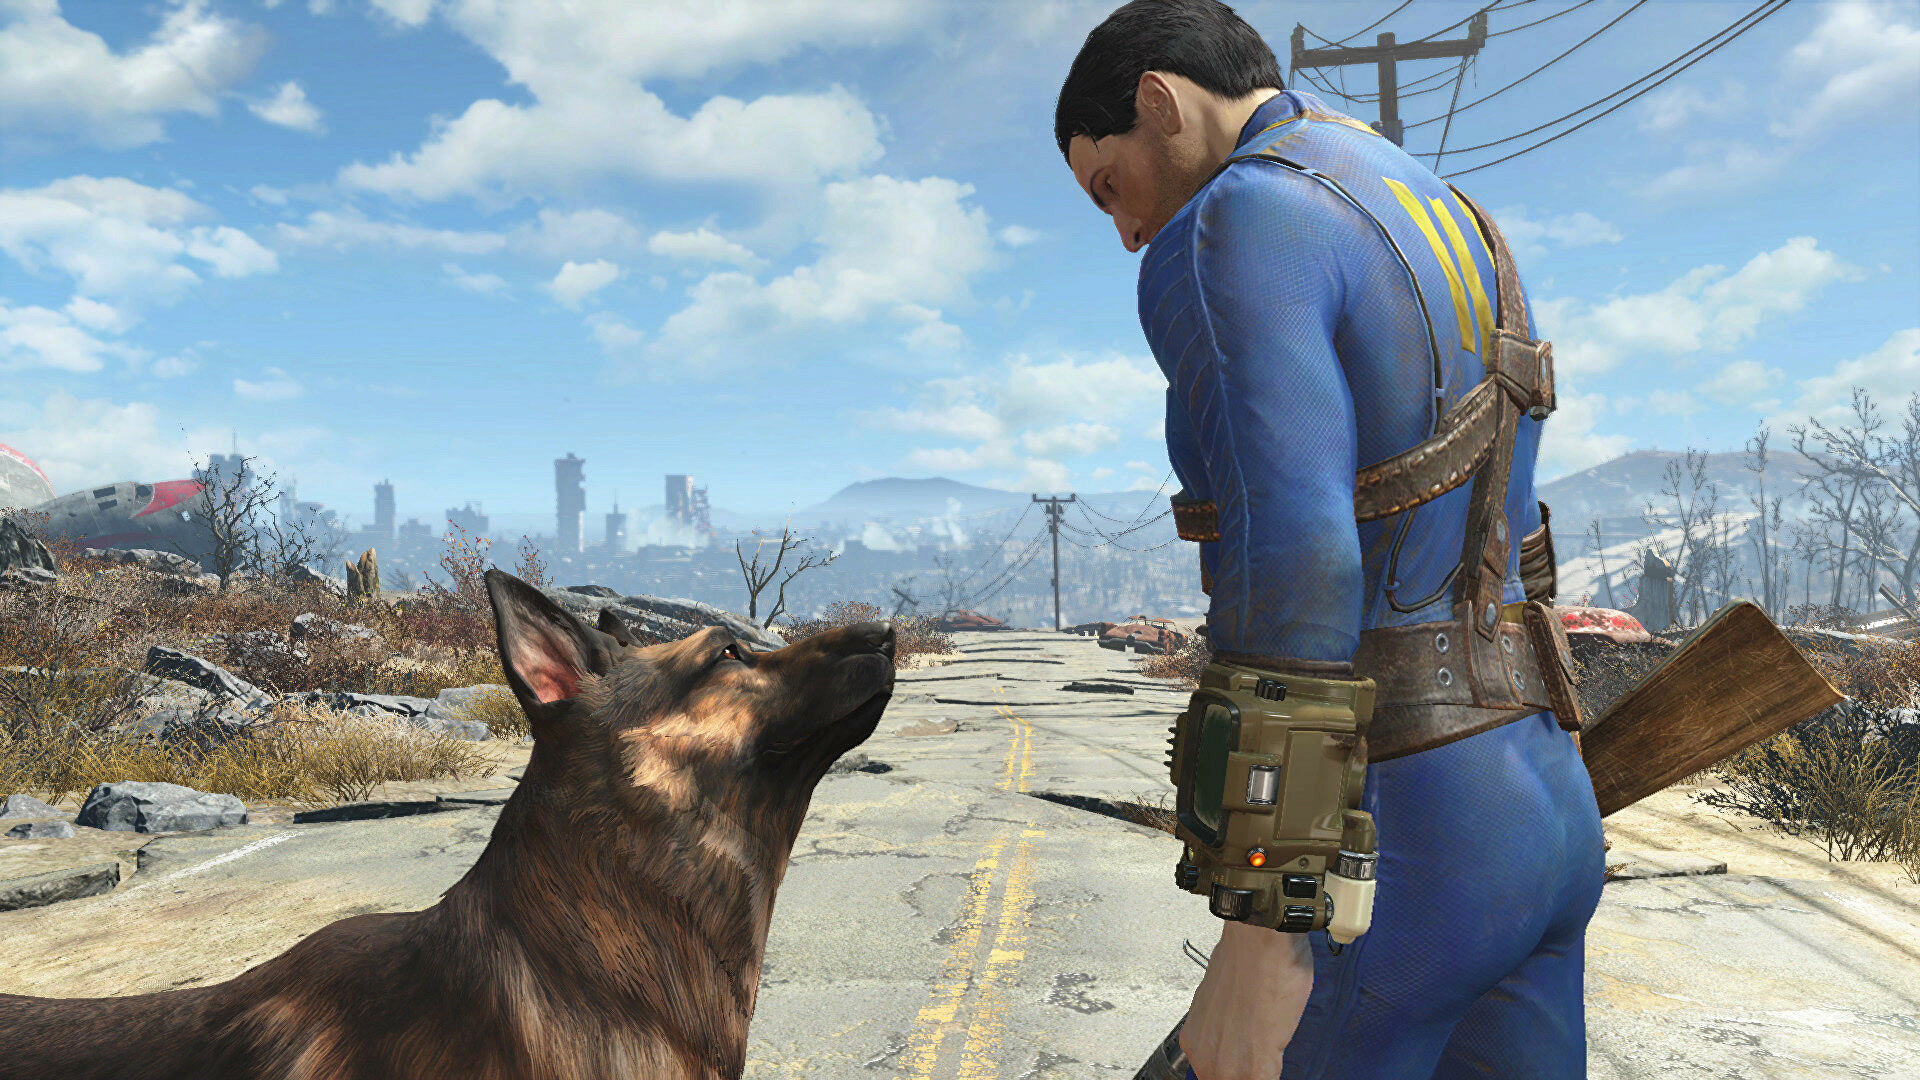 todd-howard-confirms-fallout-5-is-coming-after-the-elder-scrolls-6